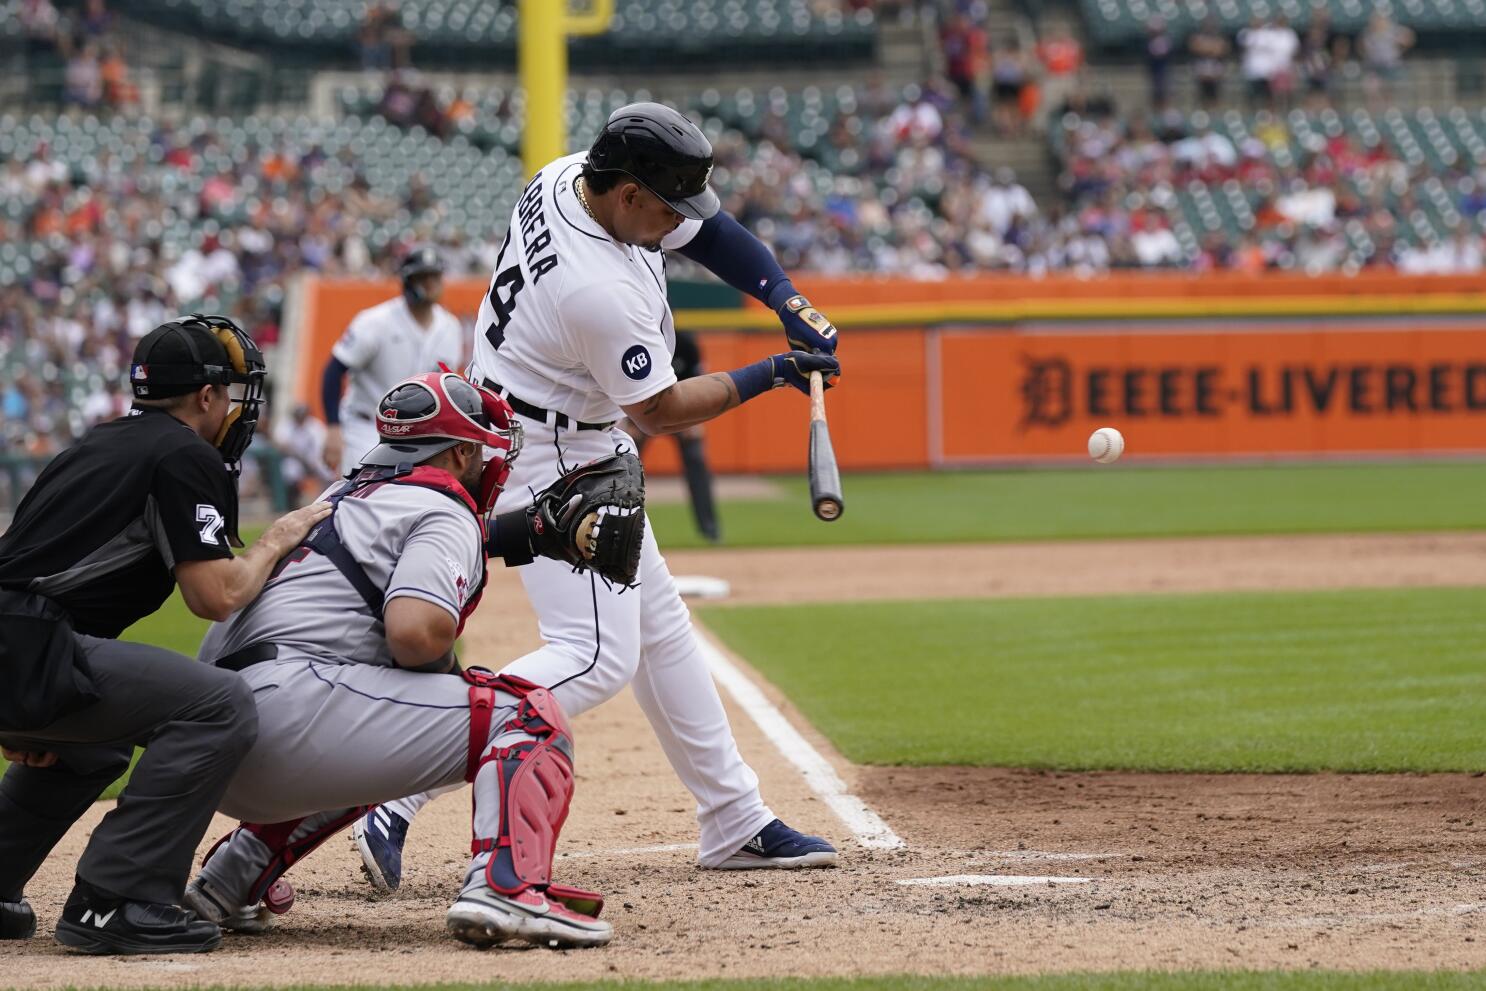 White Sox vs Tigers: Miguel Cabrera's Last Trip to the South Side